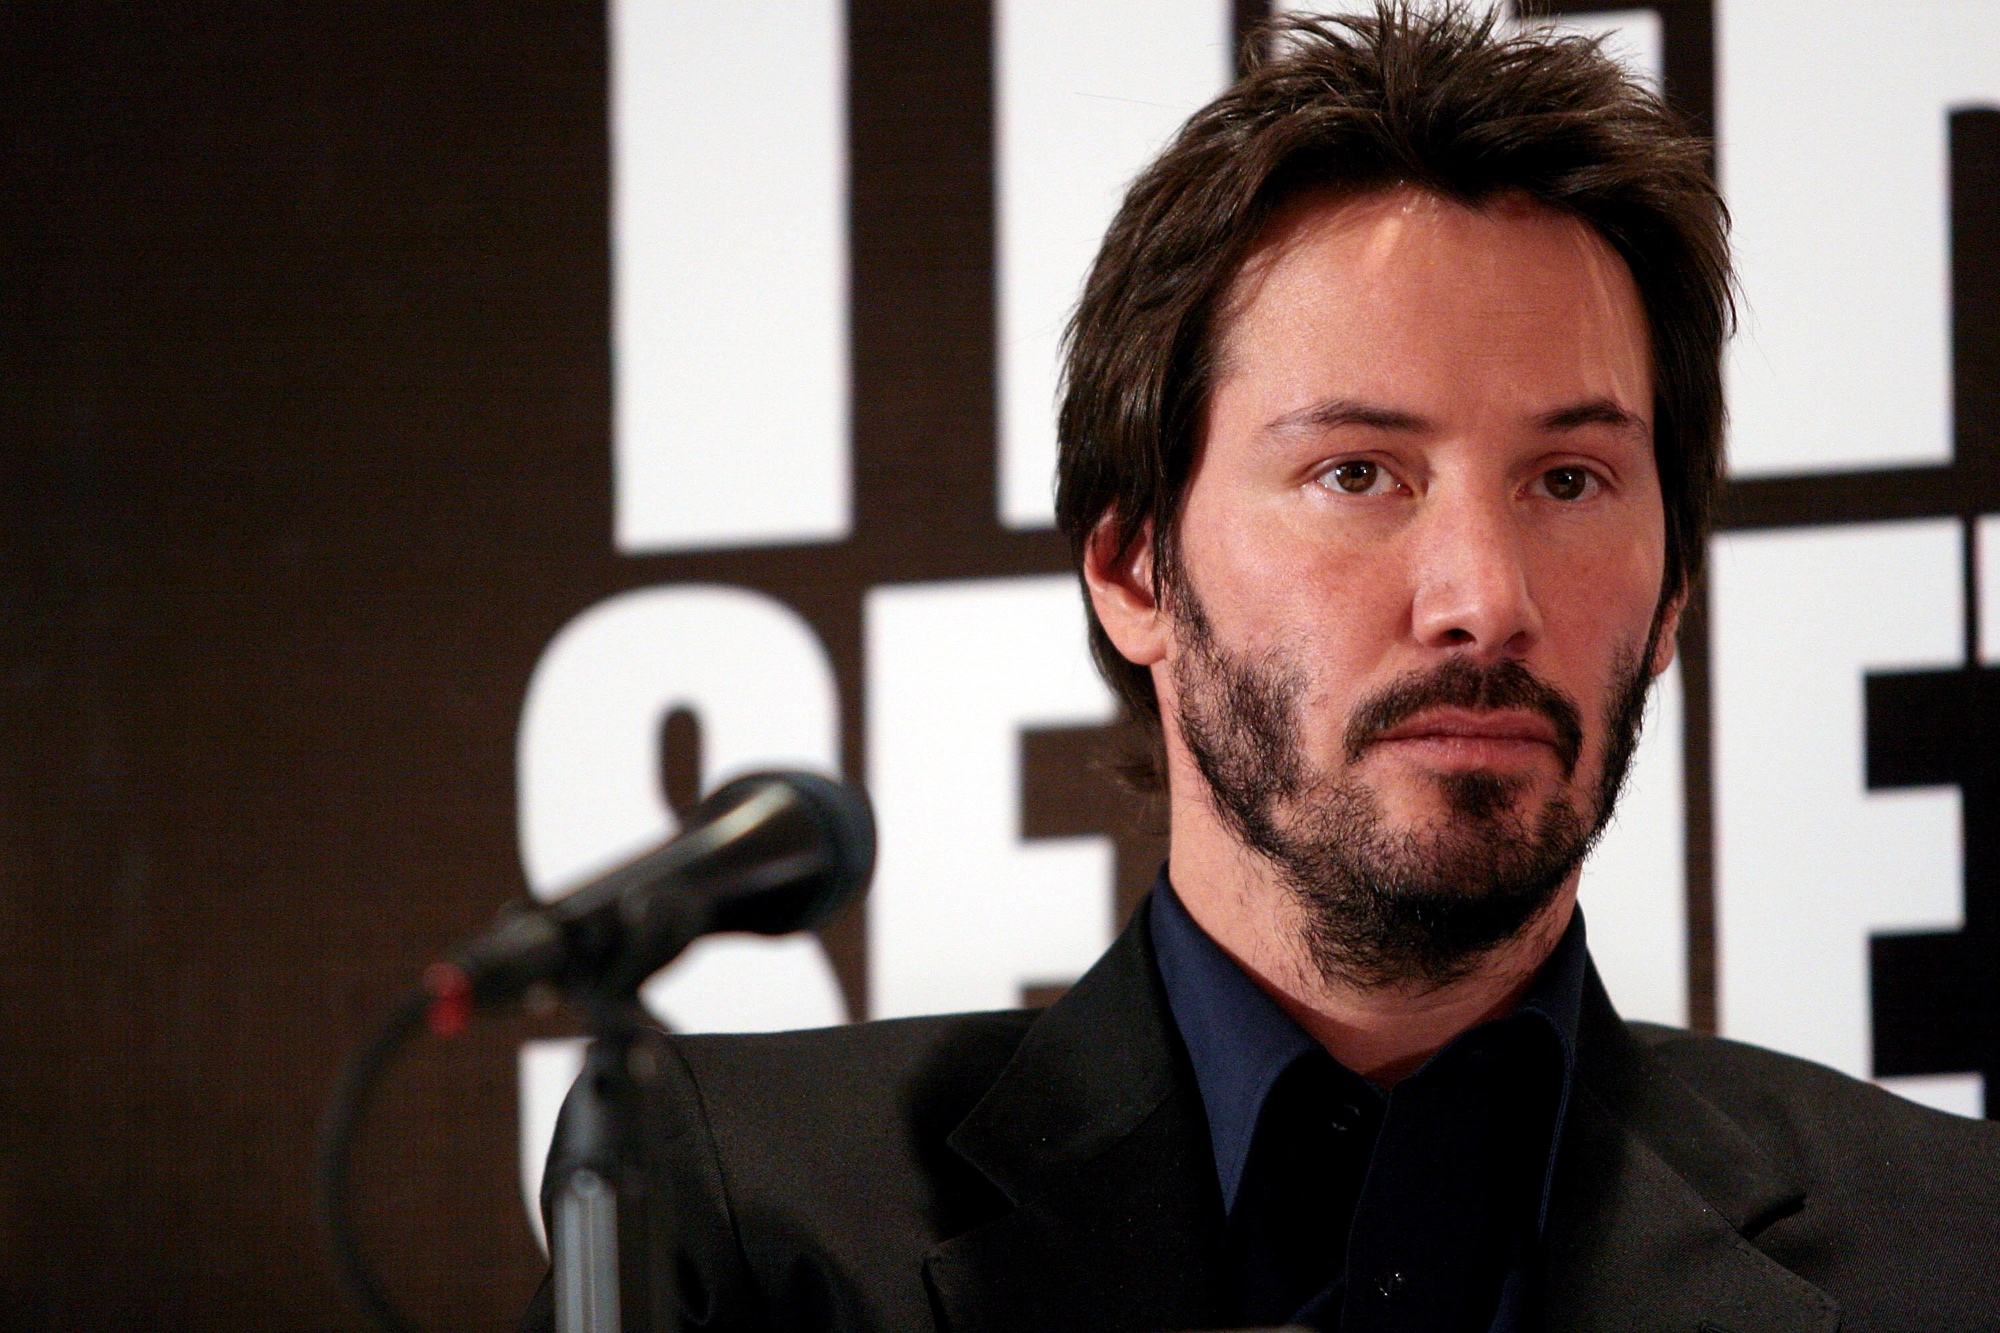 'Dangerous Liaisons' star Keanu Reeves sitting in front of a microphone